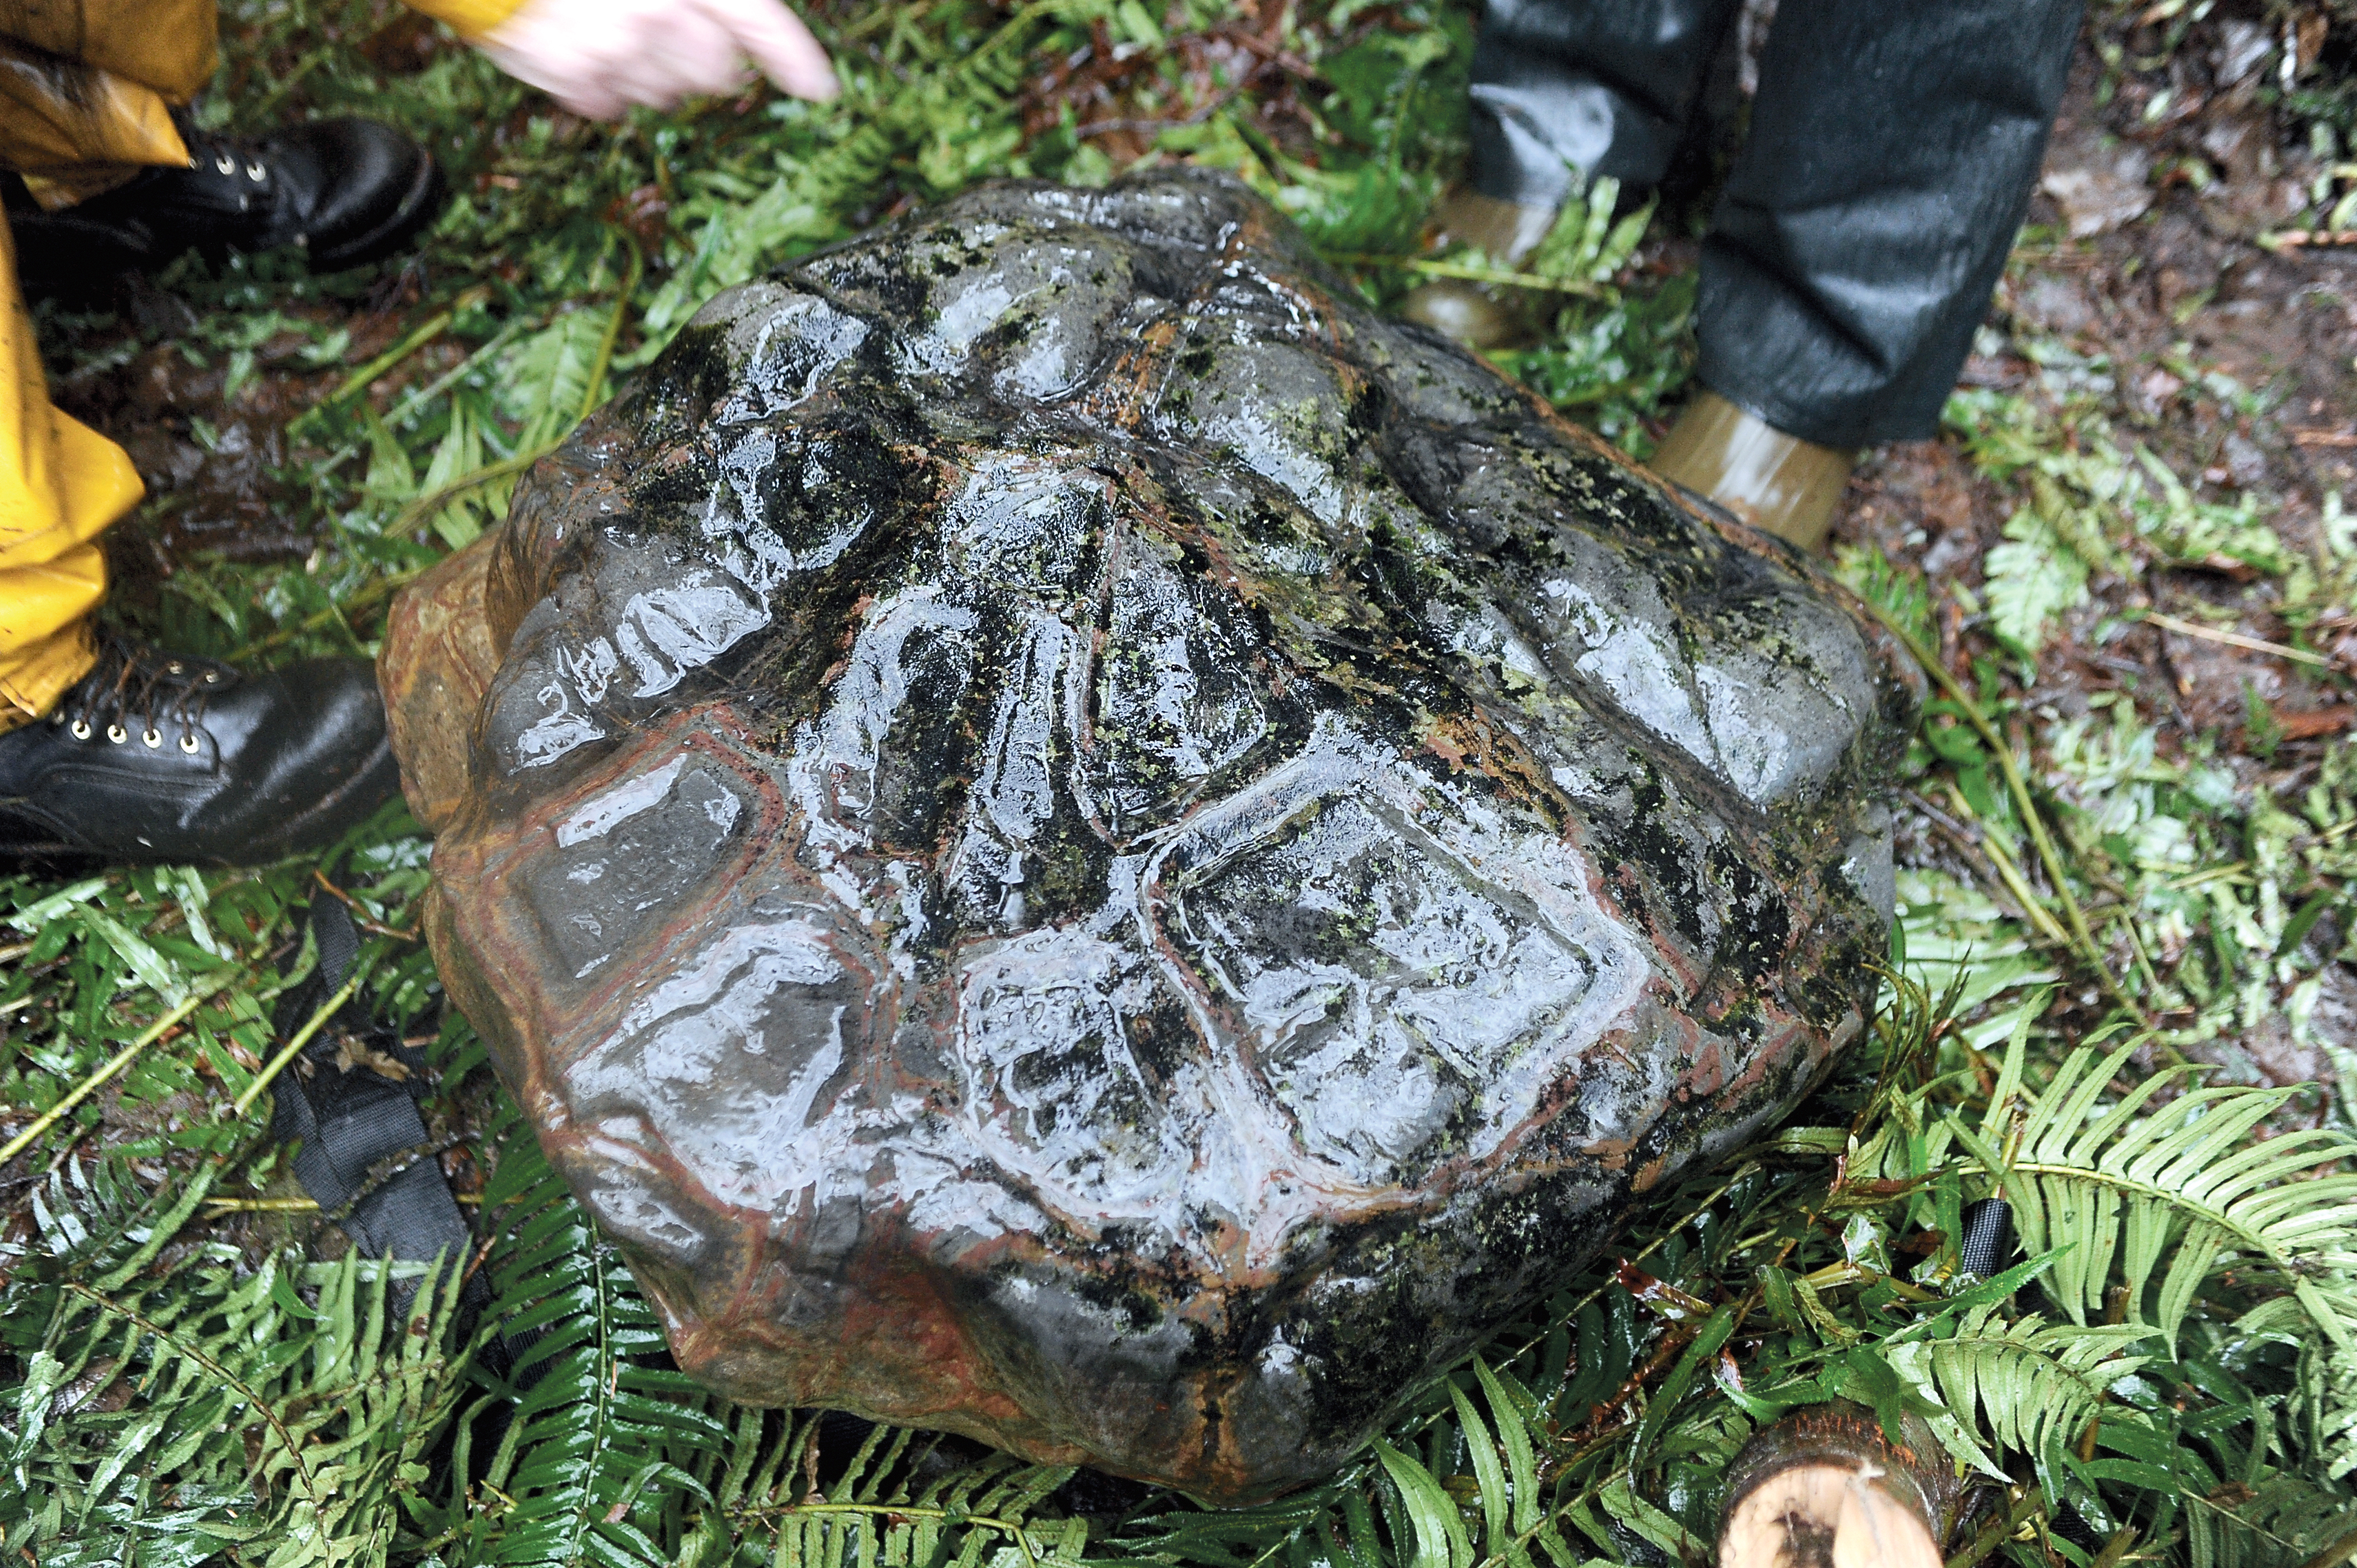 This petroglyph telling the Quileute legend of the battle between K'wati and the Red Lizard was discovered near Forks last December by Gig Harbor fisherman Erik Wasankari. Lonnie Archibald/for Peninsula Daily News